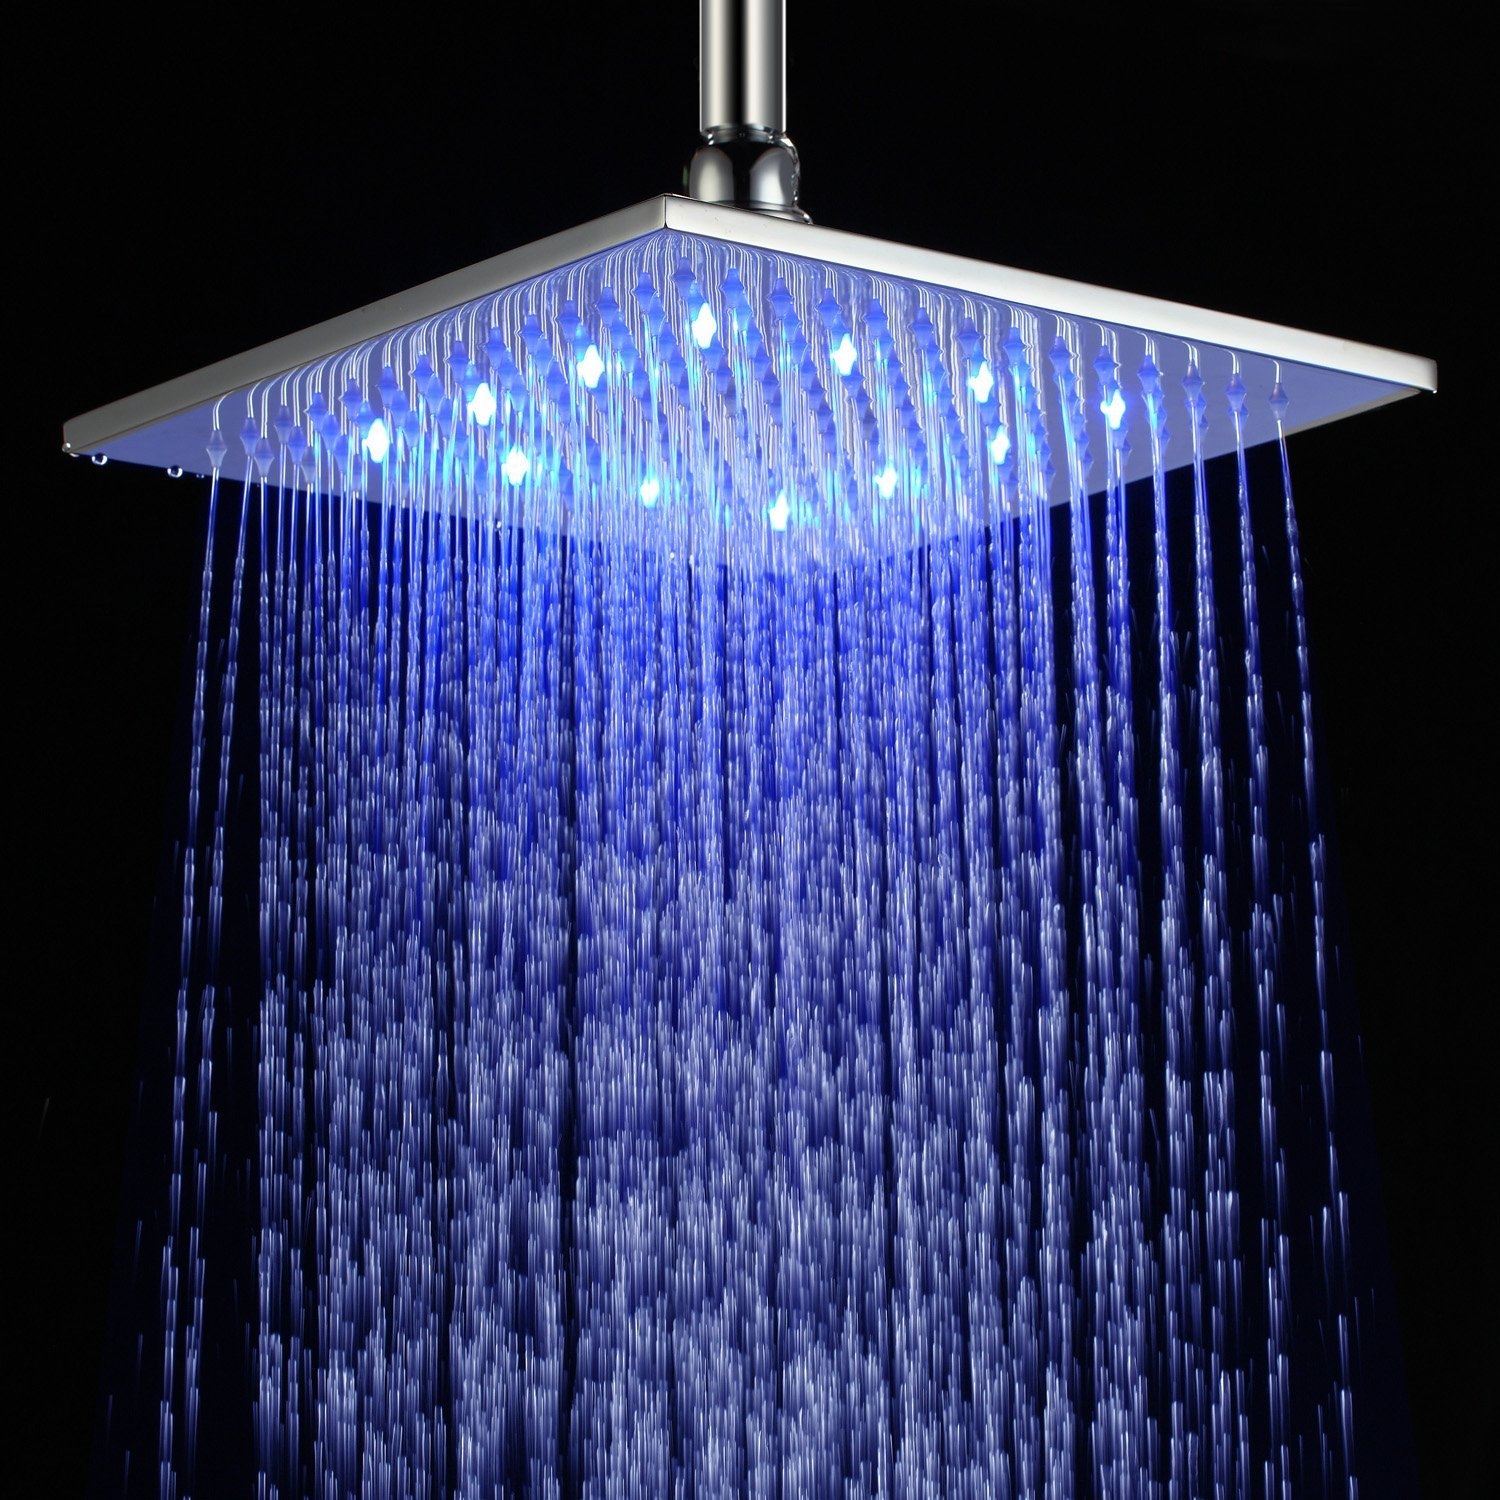 Image of 10 Inch Modern Stylish Square Brushed Nickel Rain Shower Head Solid Brass